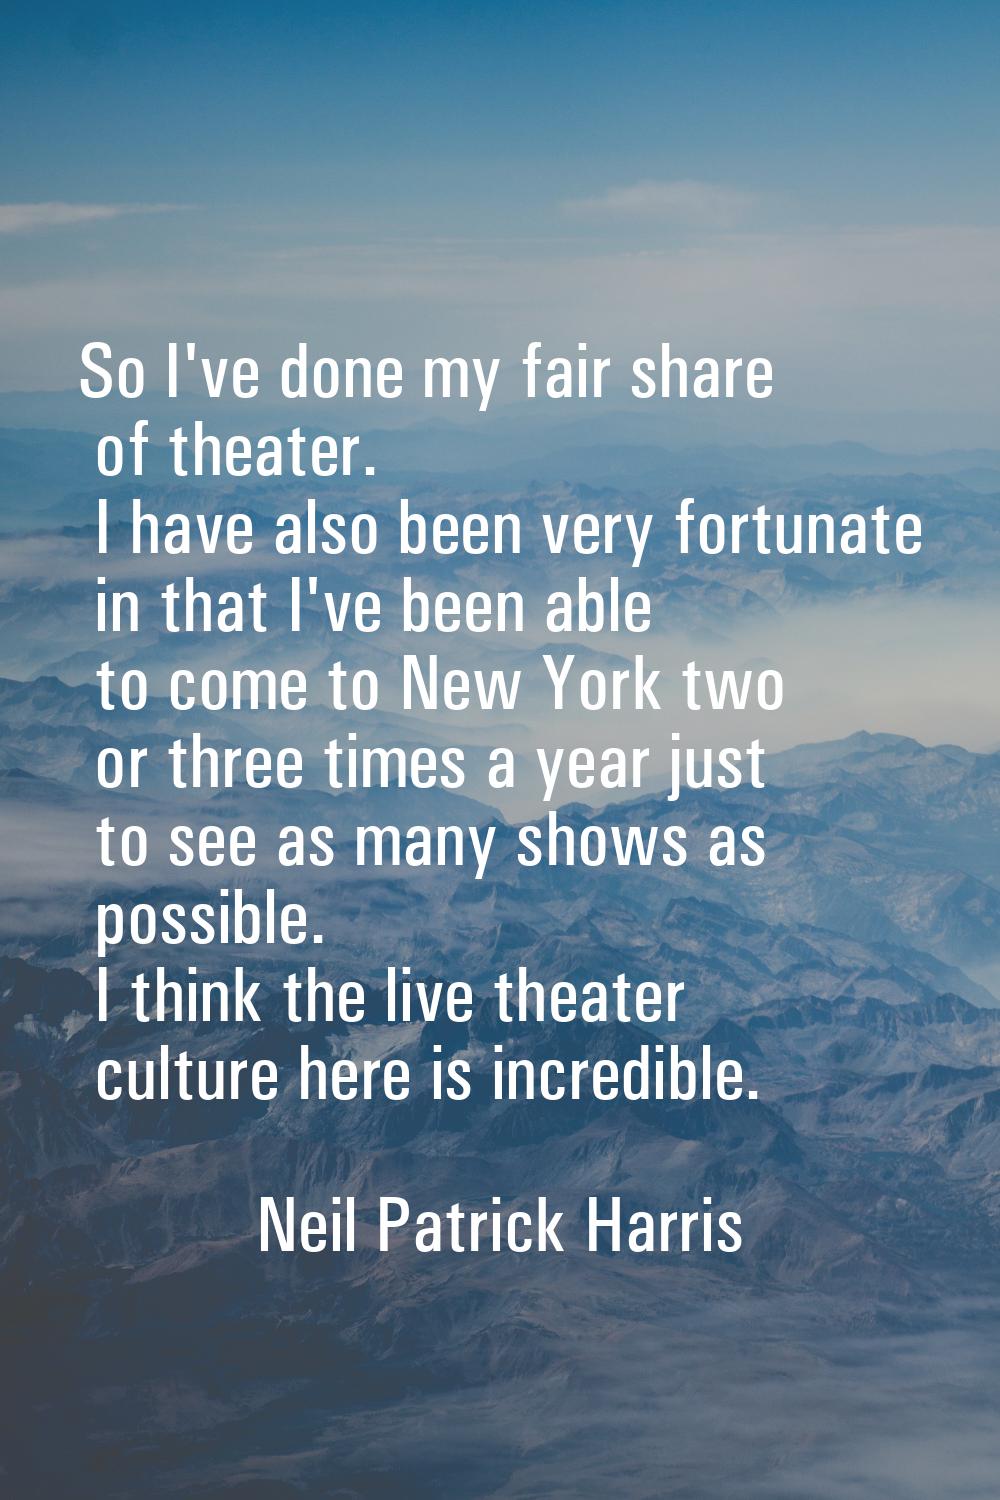 So I've done my fair share of theater. I have also been very fortunate in that I've been able to co